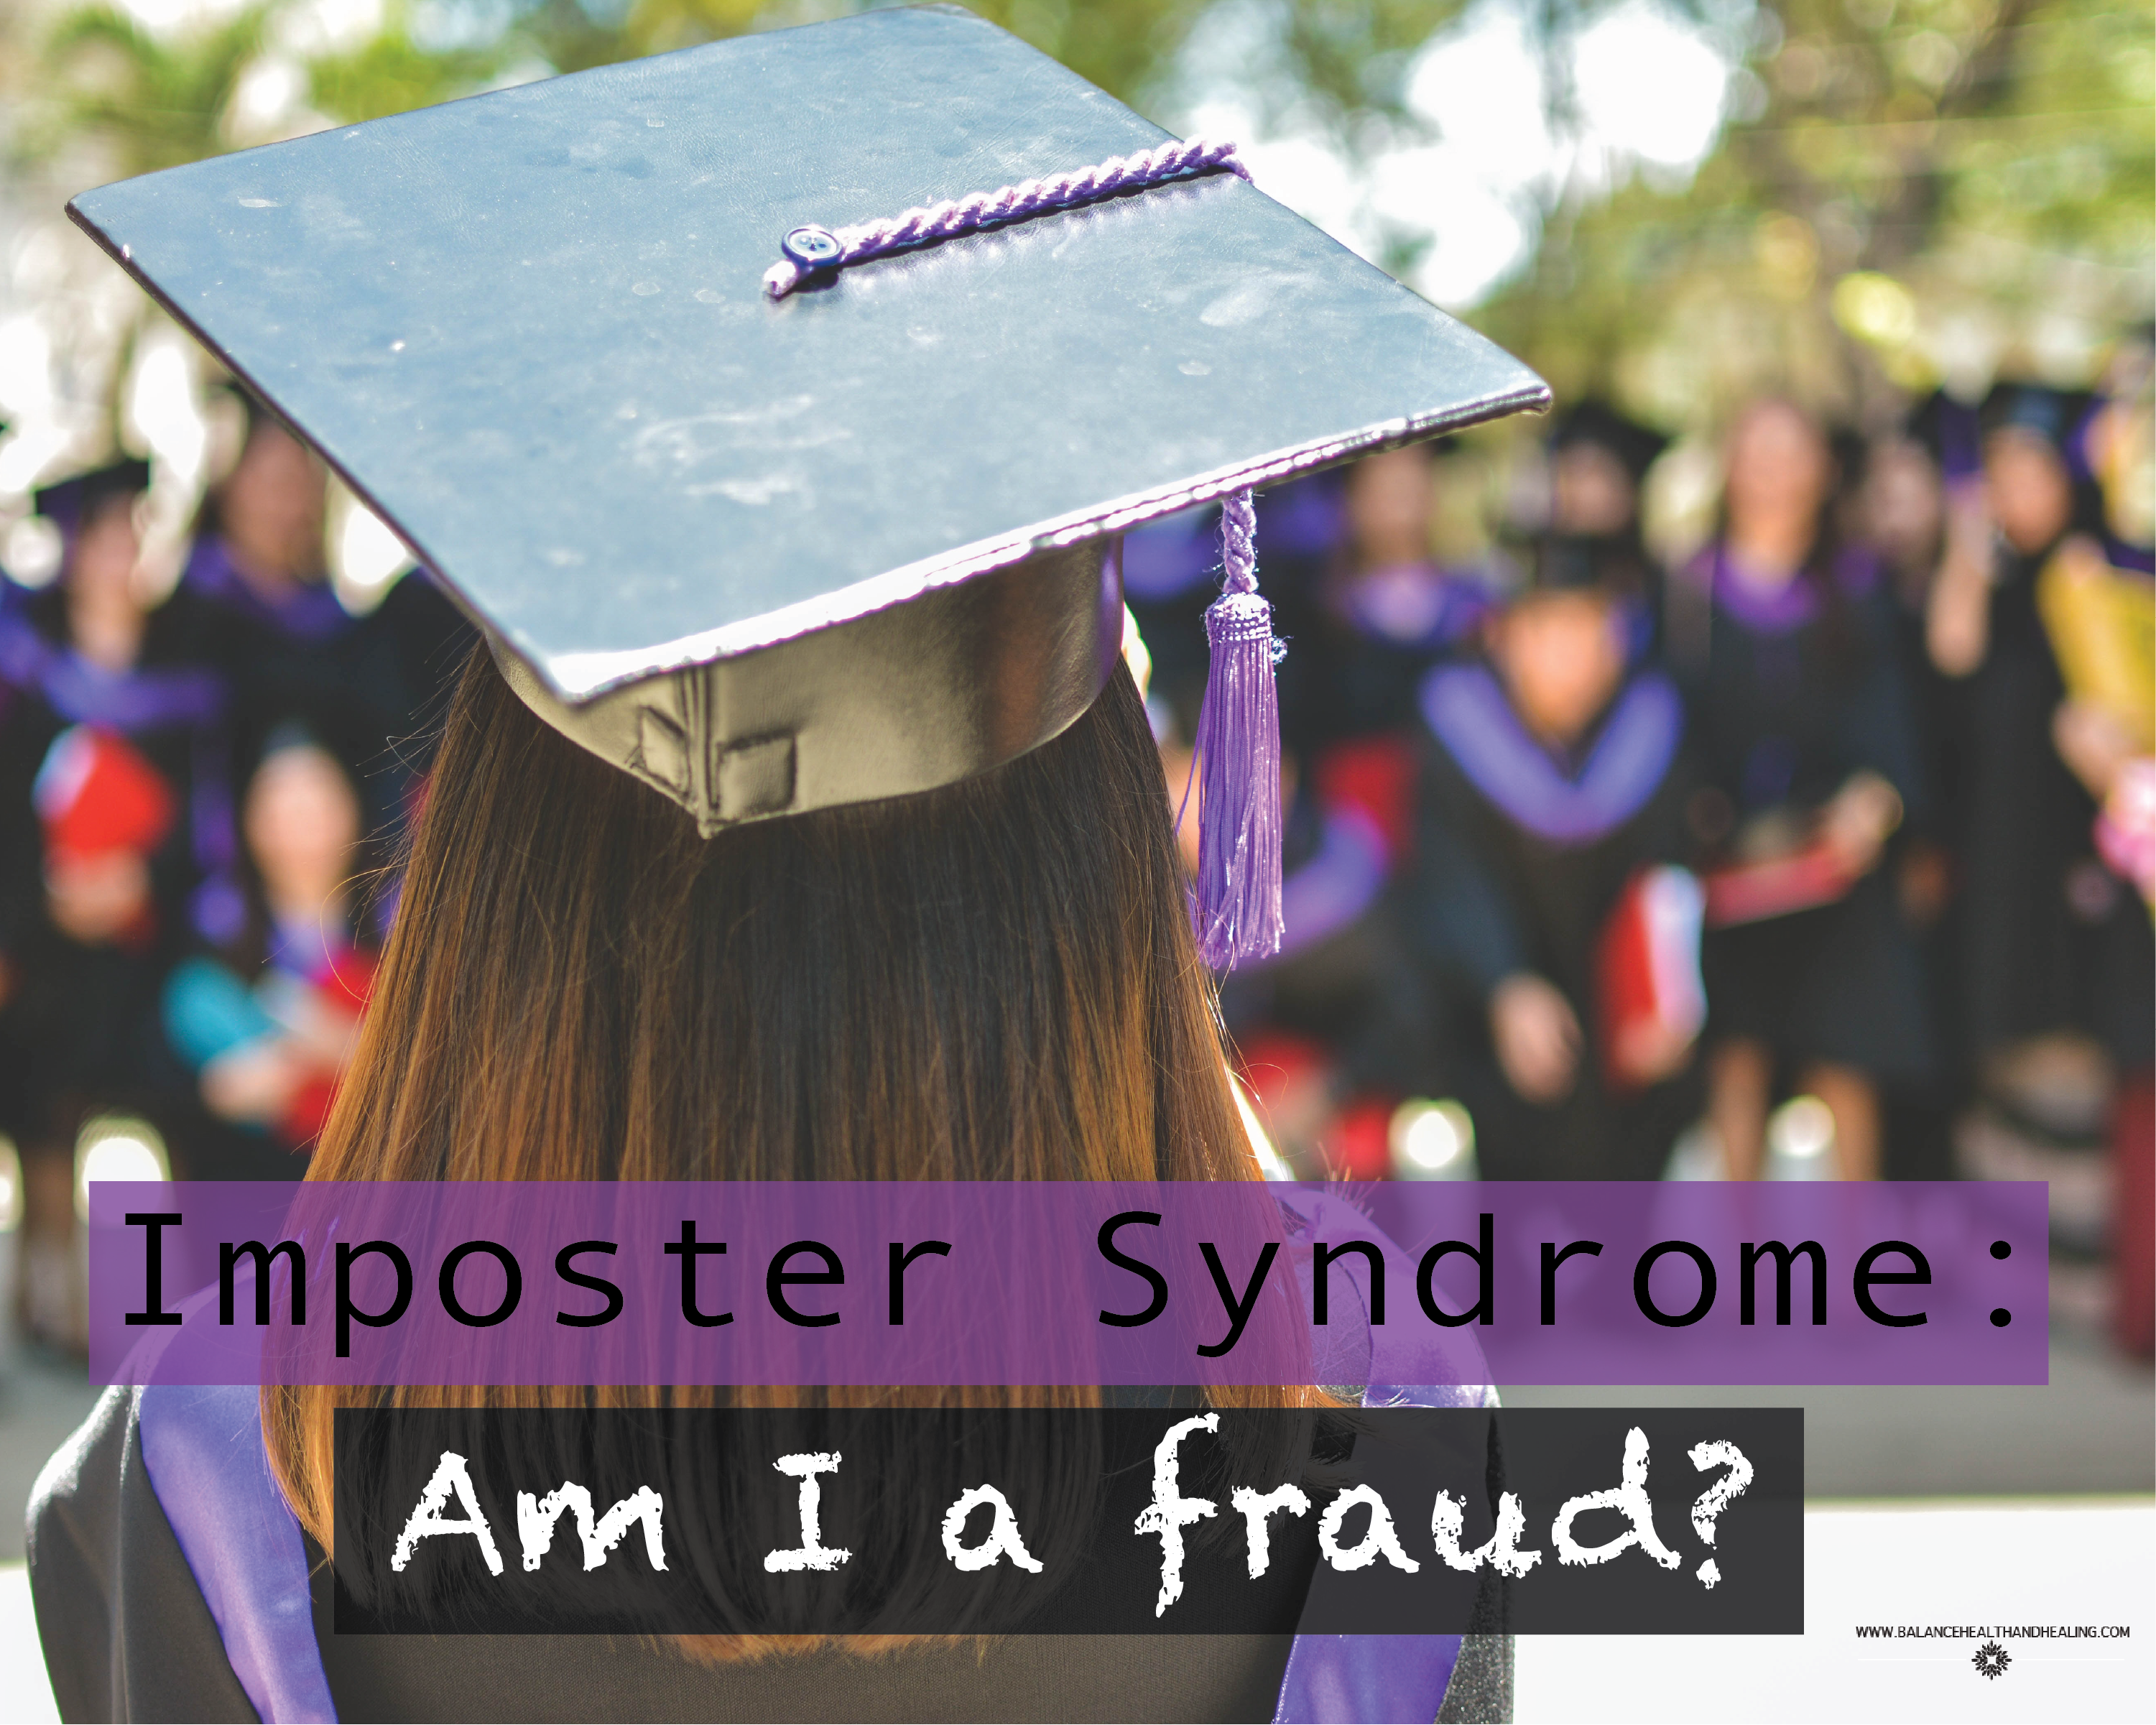 Imposter Syndrome: Am I a fraud?